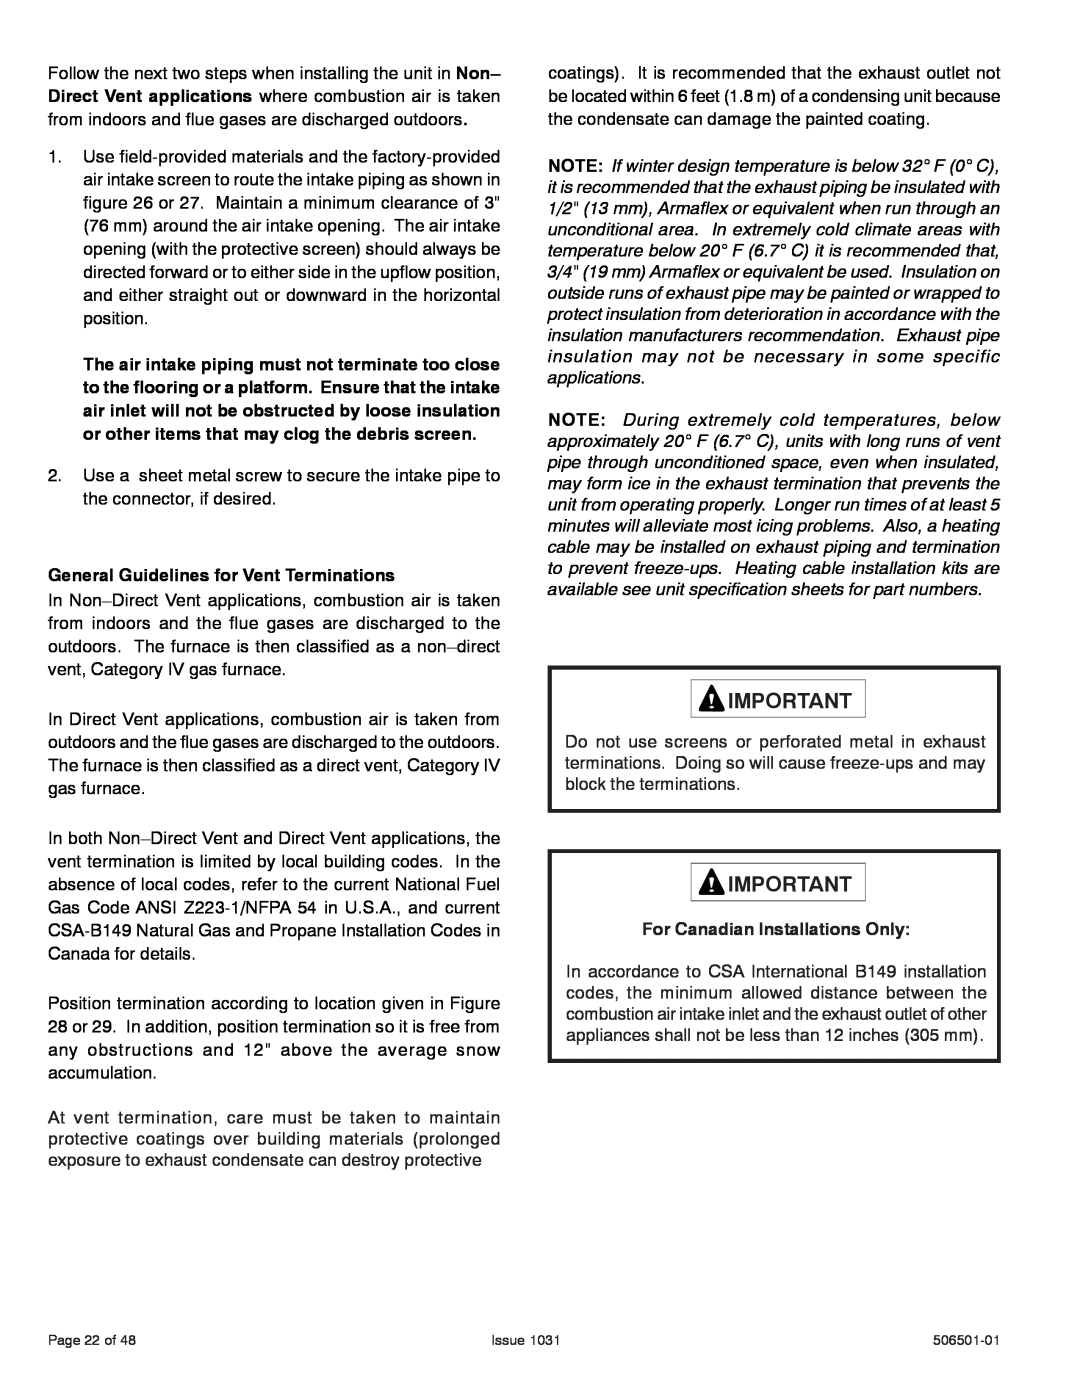 Allied Air Enterprises A93UH General Guidelines for Vent Terminations, For Canadian Installations Only, Page 22 of, Issue 